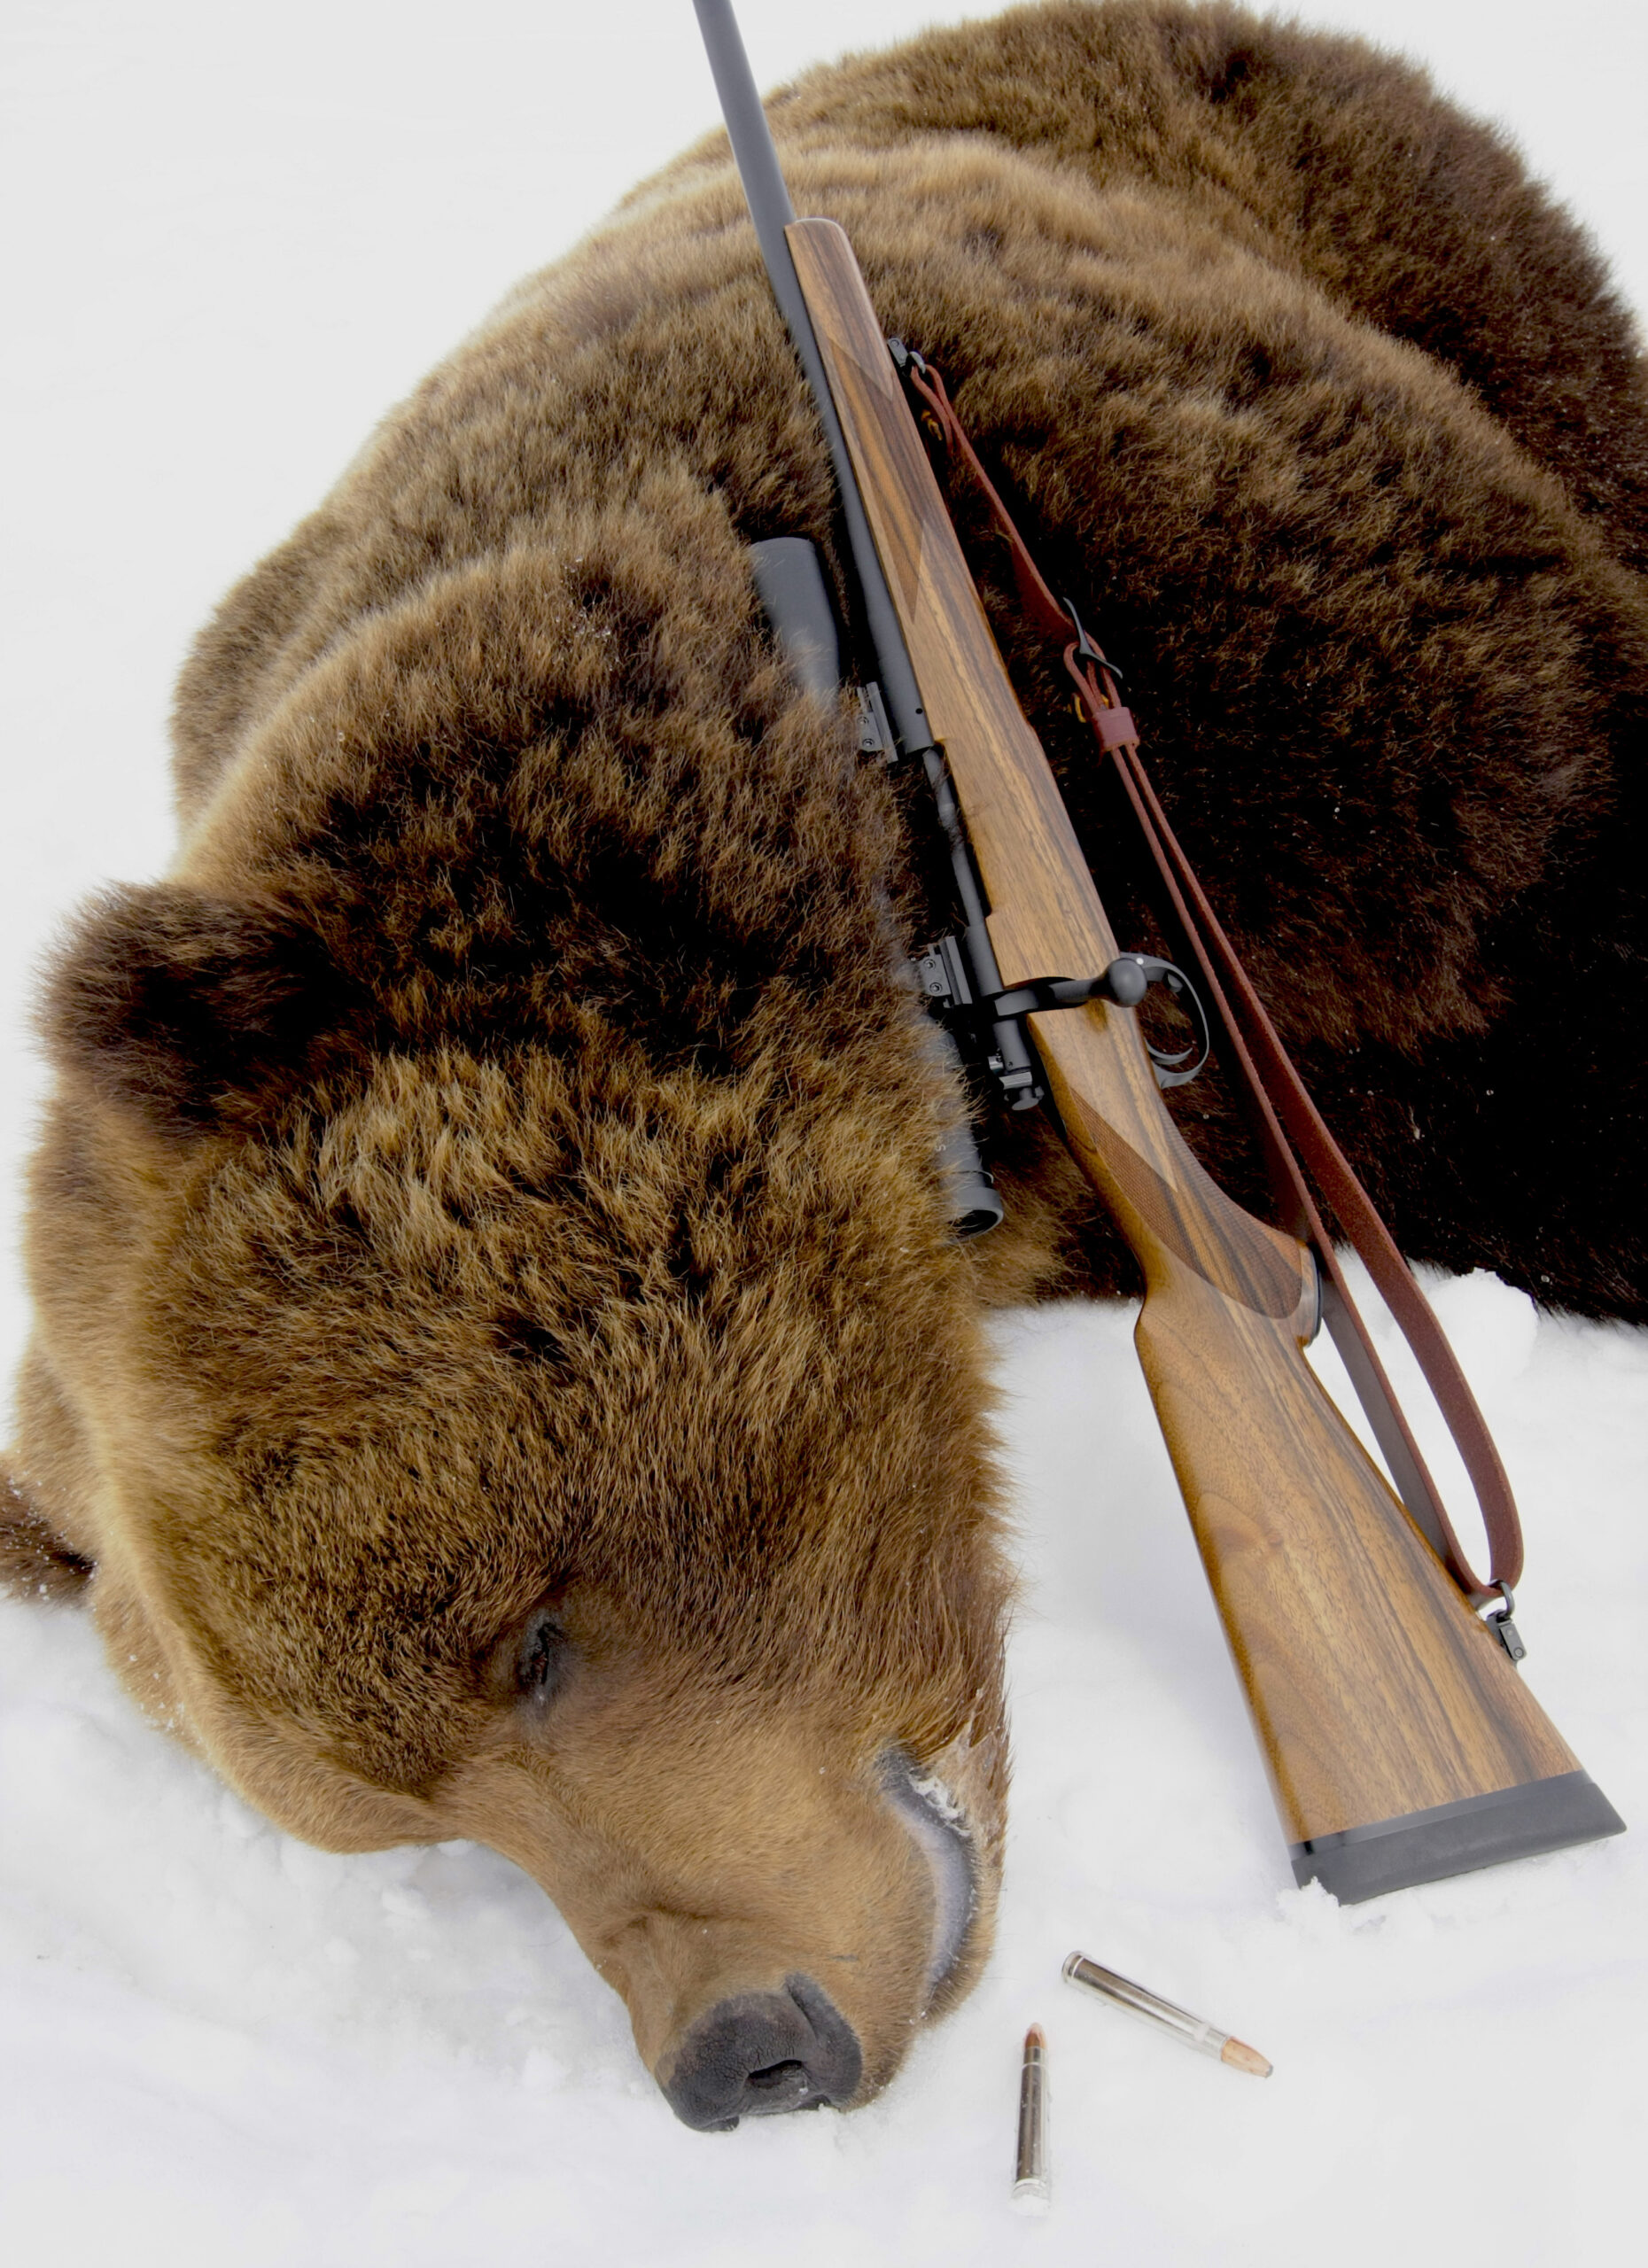 A bear rifle for hunting in Alaska.